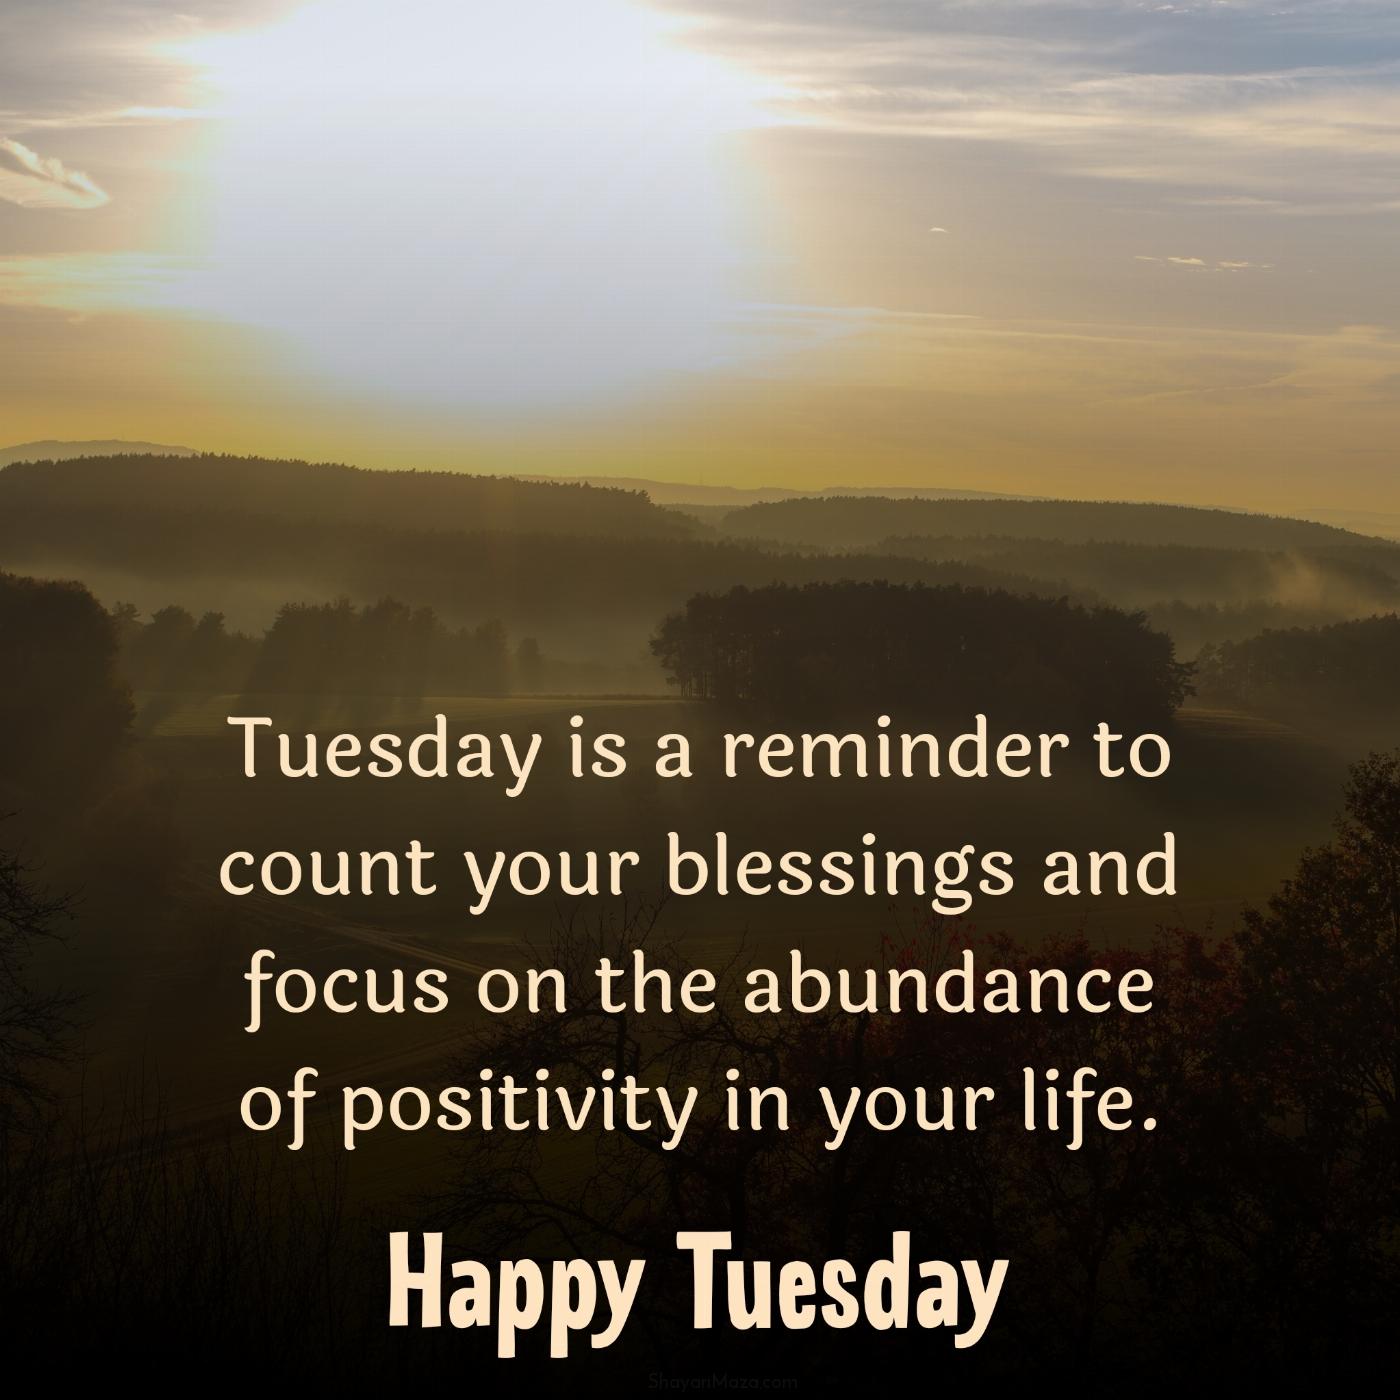 Tuesday is a reminder to count your blessings